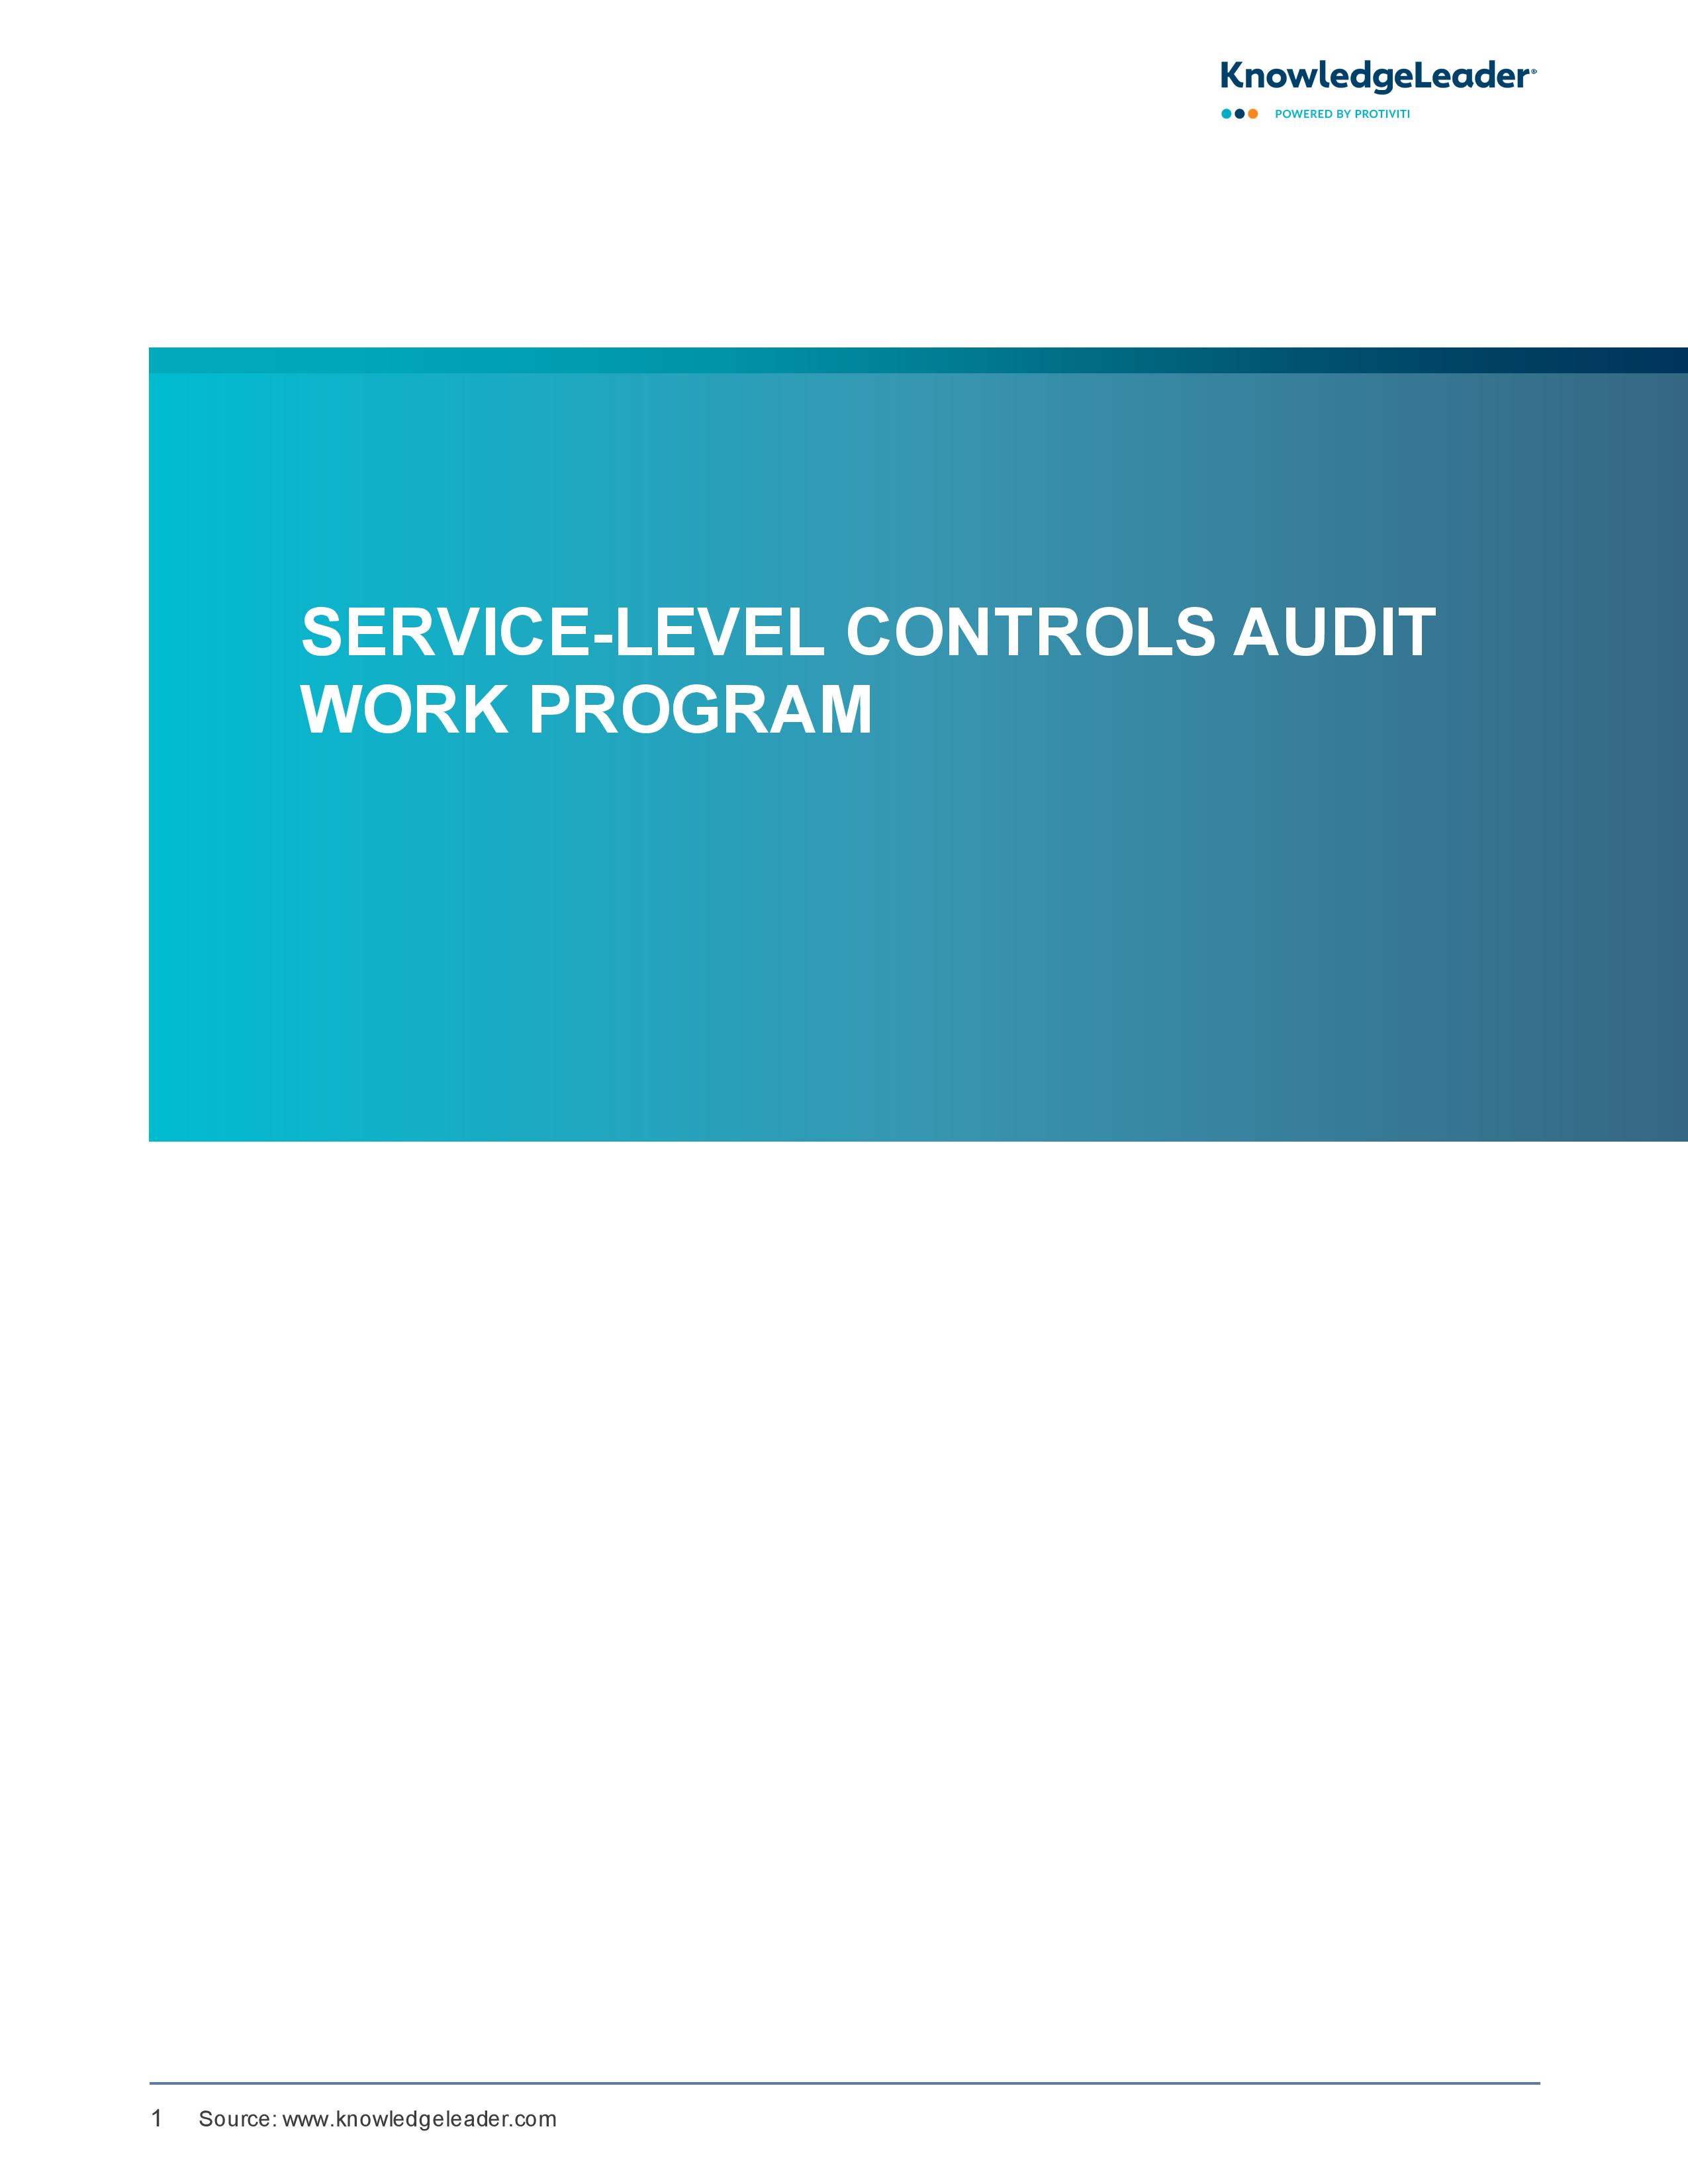 screenshot of the first page of Service-Level Controls Audit Work Program